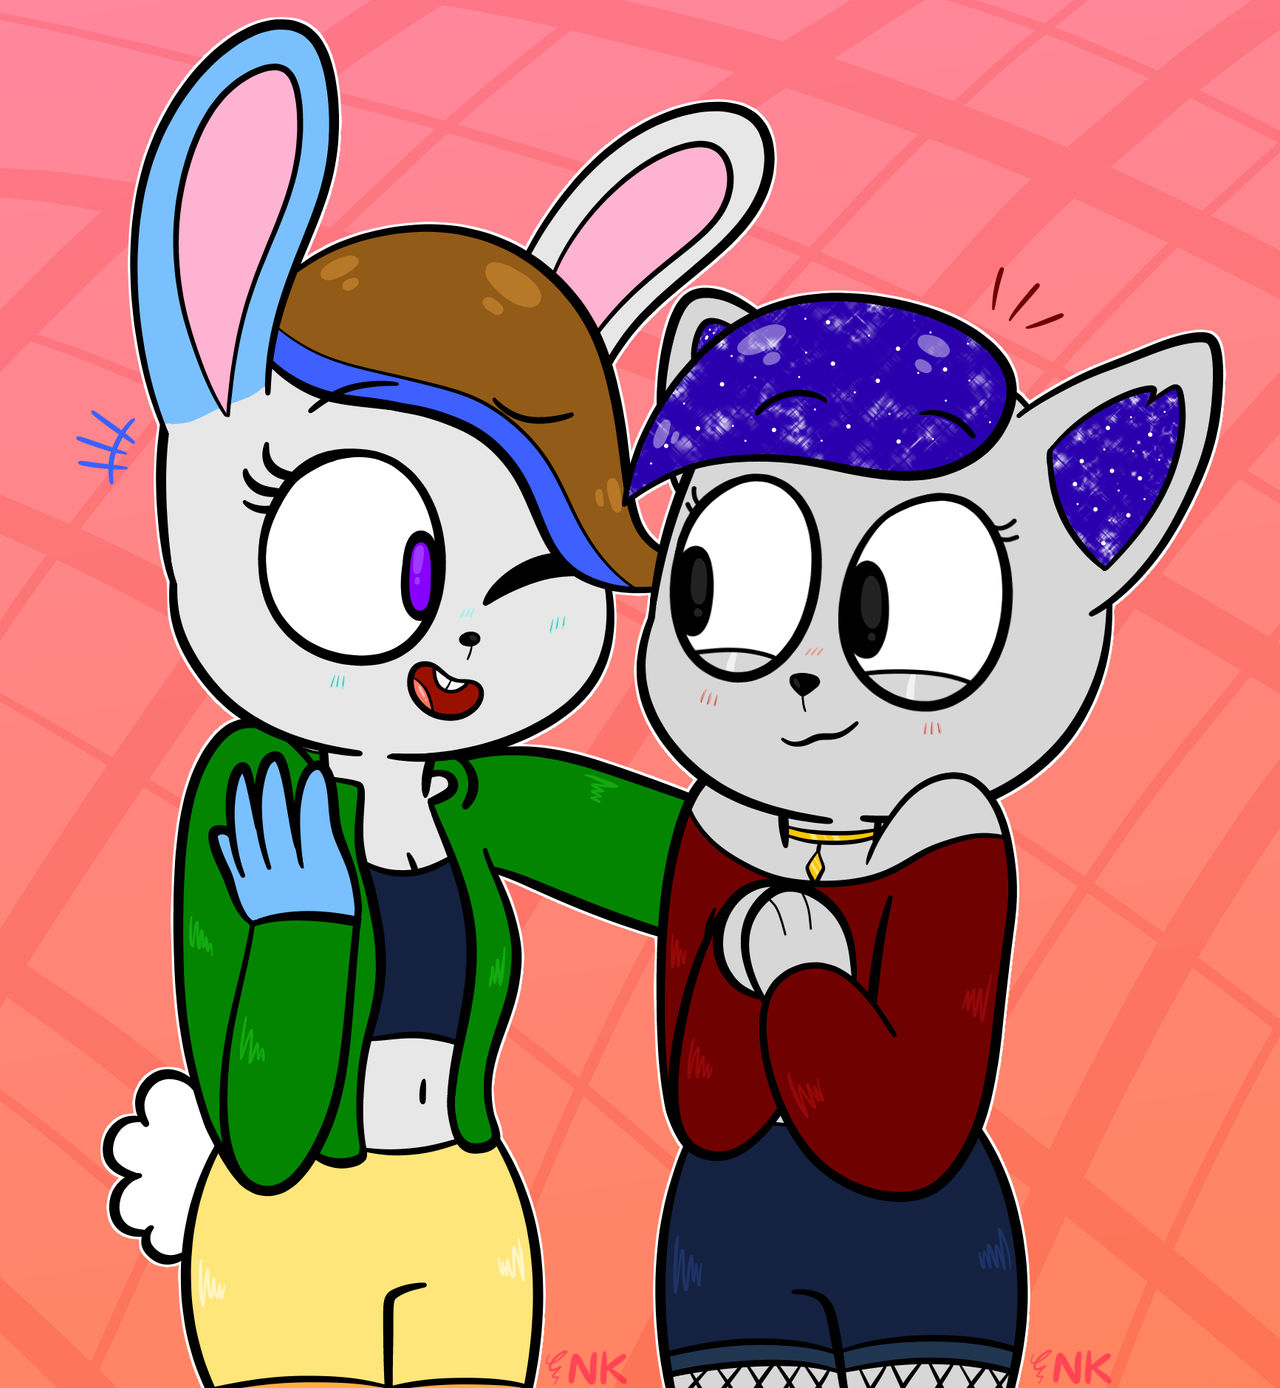 [AT]Rabbit and Cat Are a Friends! by Nikytale on DeviantArt